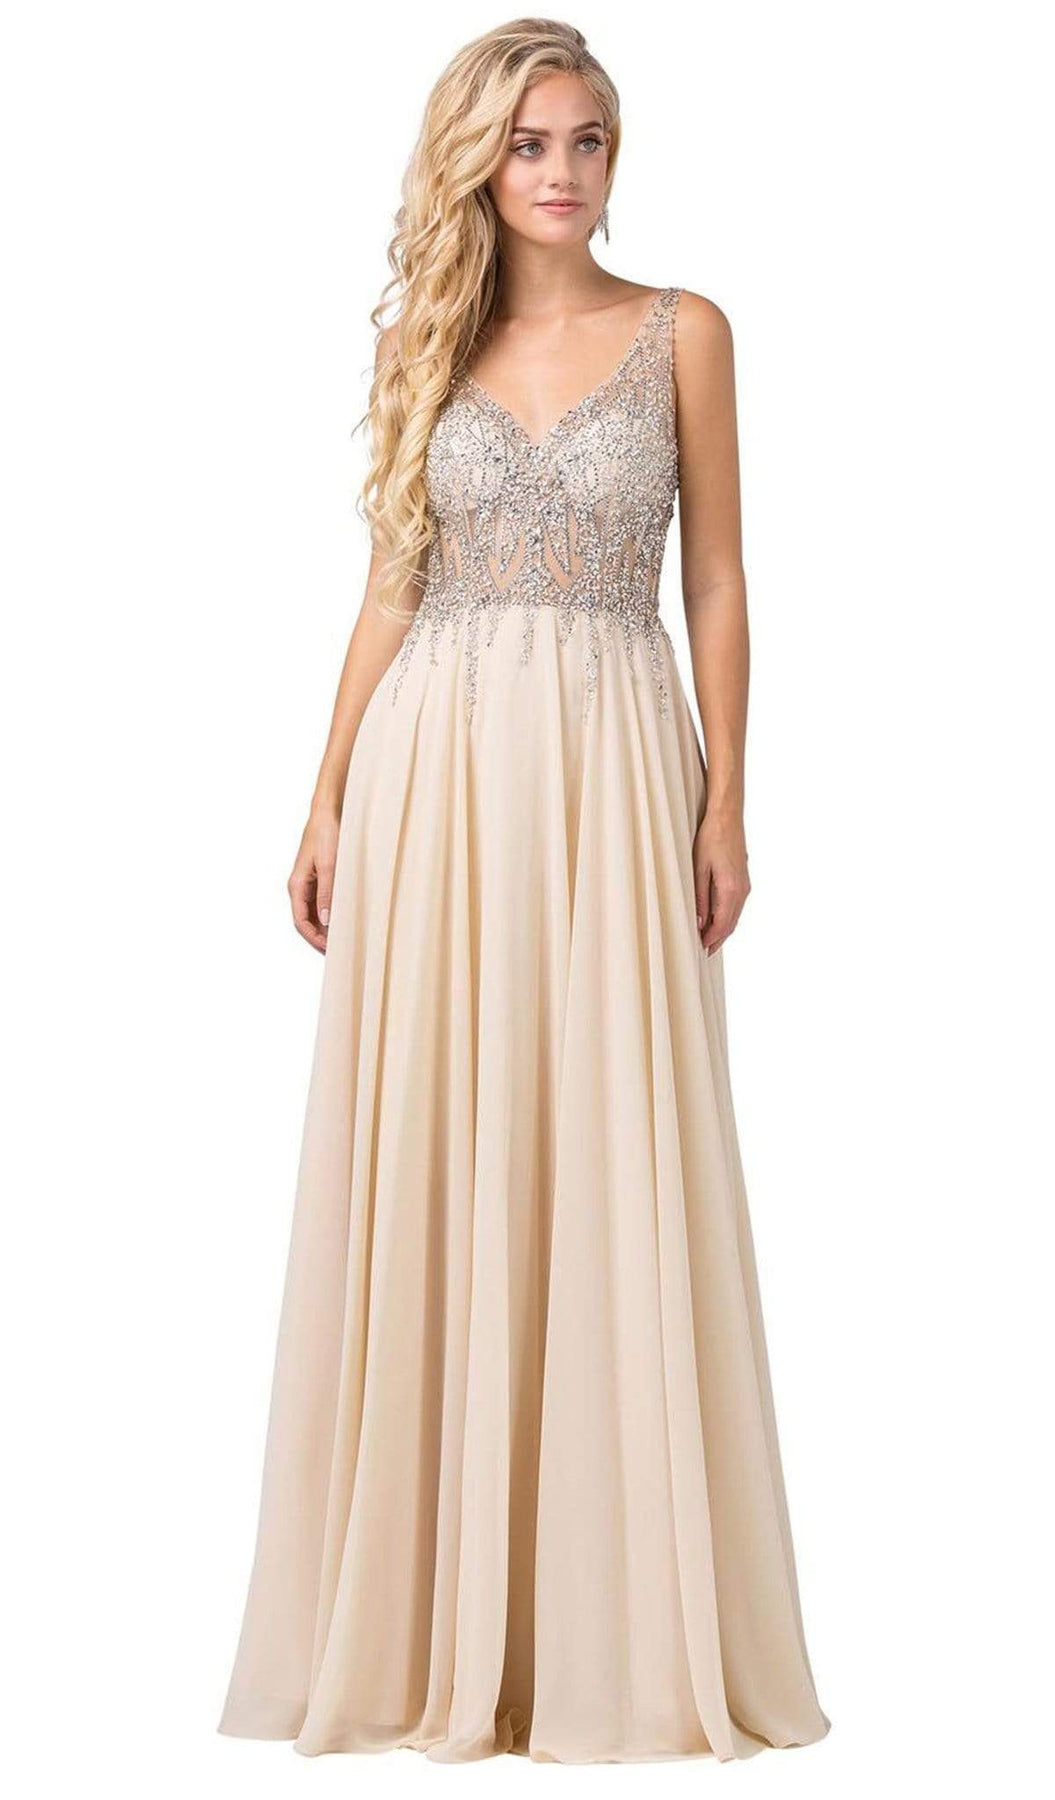 Dancing Queen - 2570 Jewel Ornate Illusion Bodice Chiffon Prom Dress Special Occasion Dress XS / Champagne